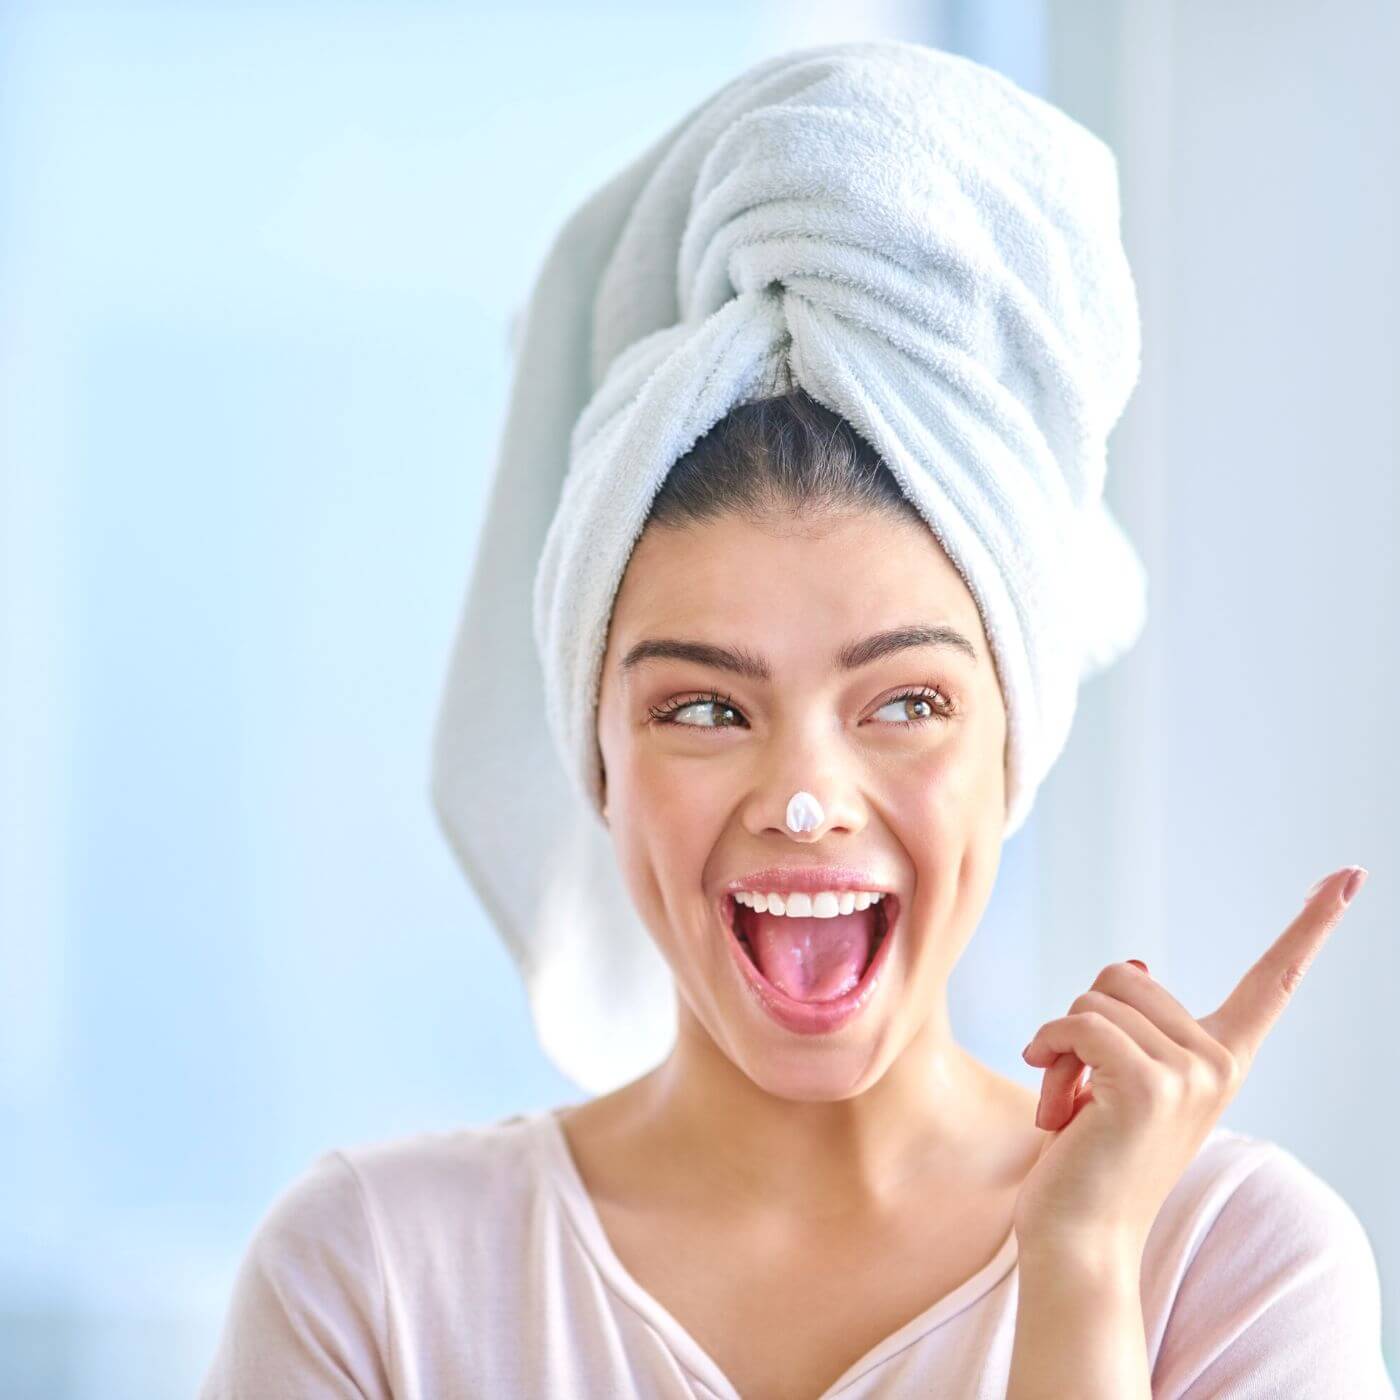 How To Cut Costs Without Skimping On Your Beauty & Self-Care Rituals - Indagare Natural Beauty